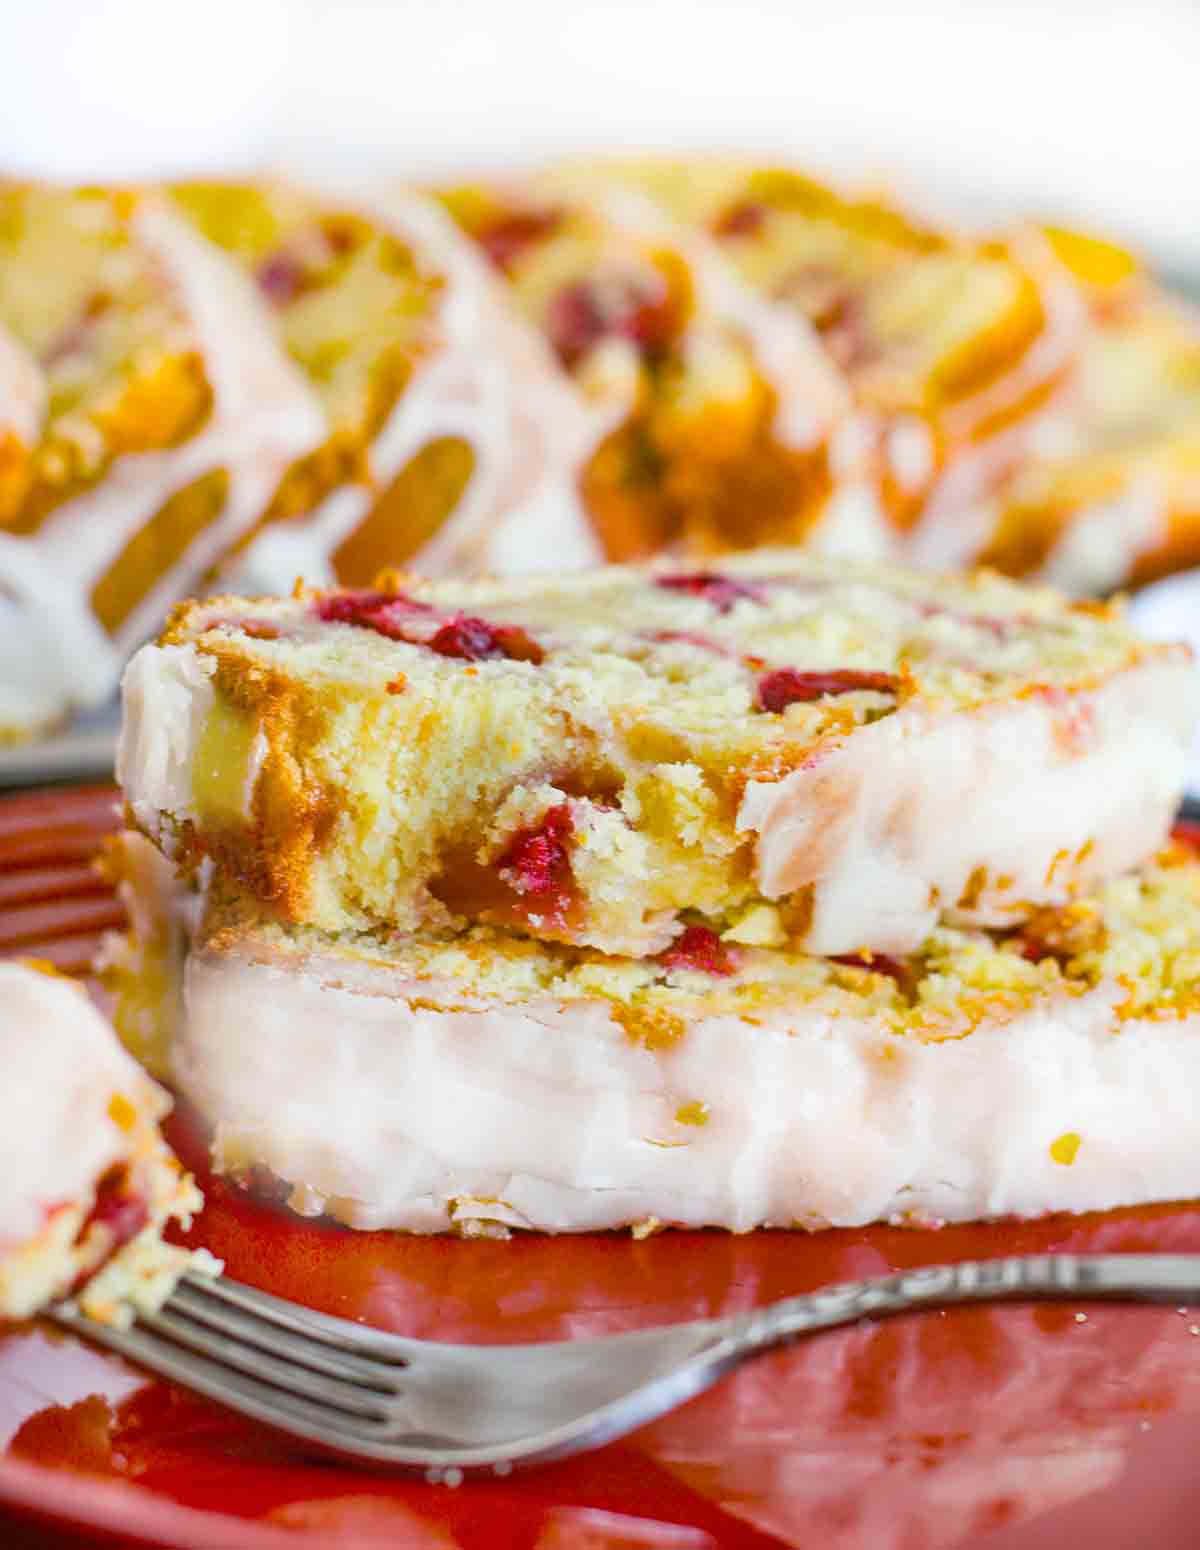 Cranberry orange bread stacked on a red plate with a fork.